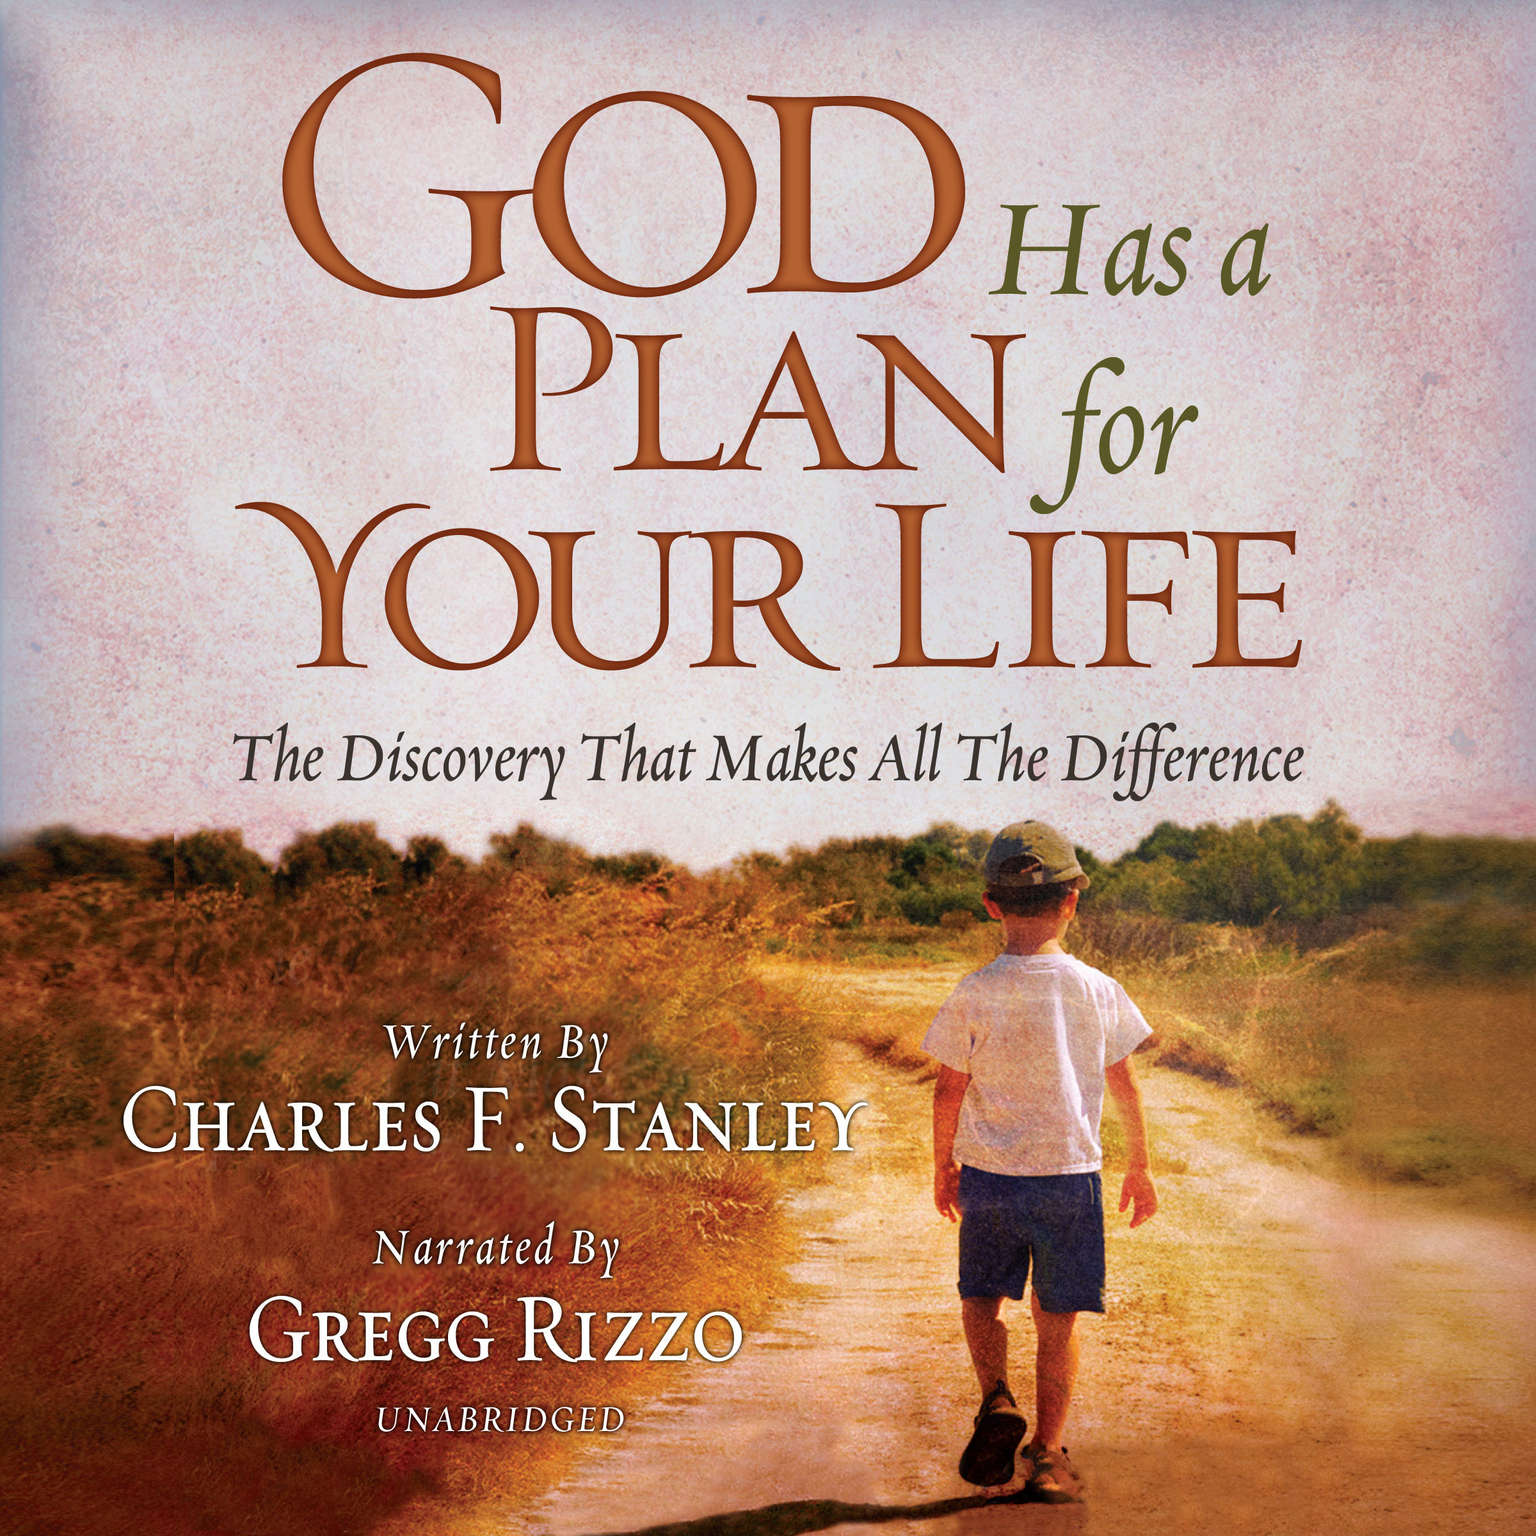 God Has a Plan for Your Life: The Discovery that Makes All the Difference Audiobook, by Charles F. Stanley